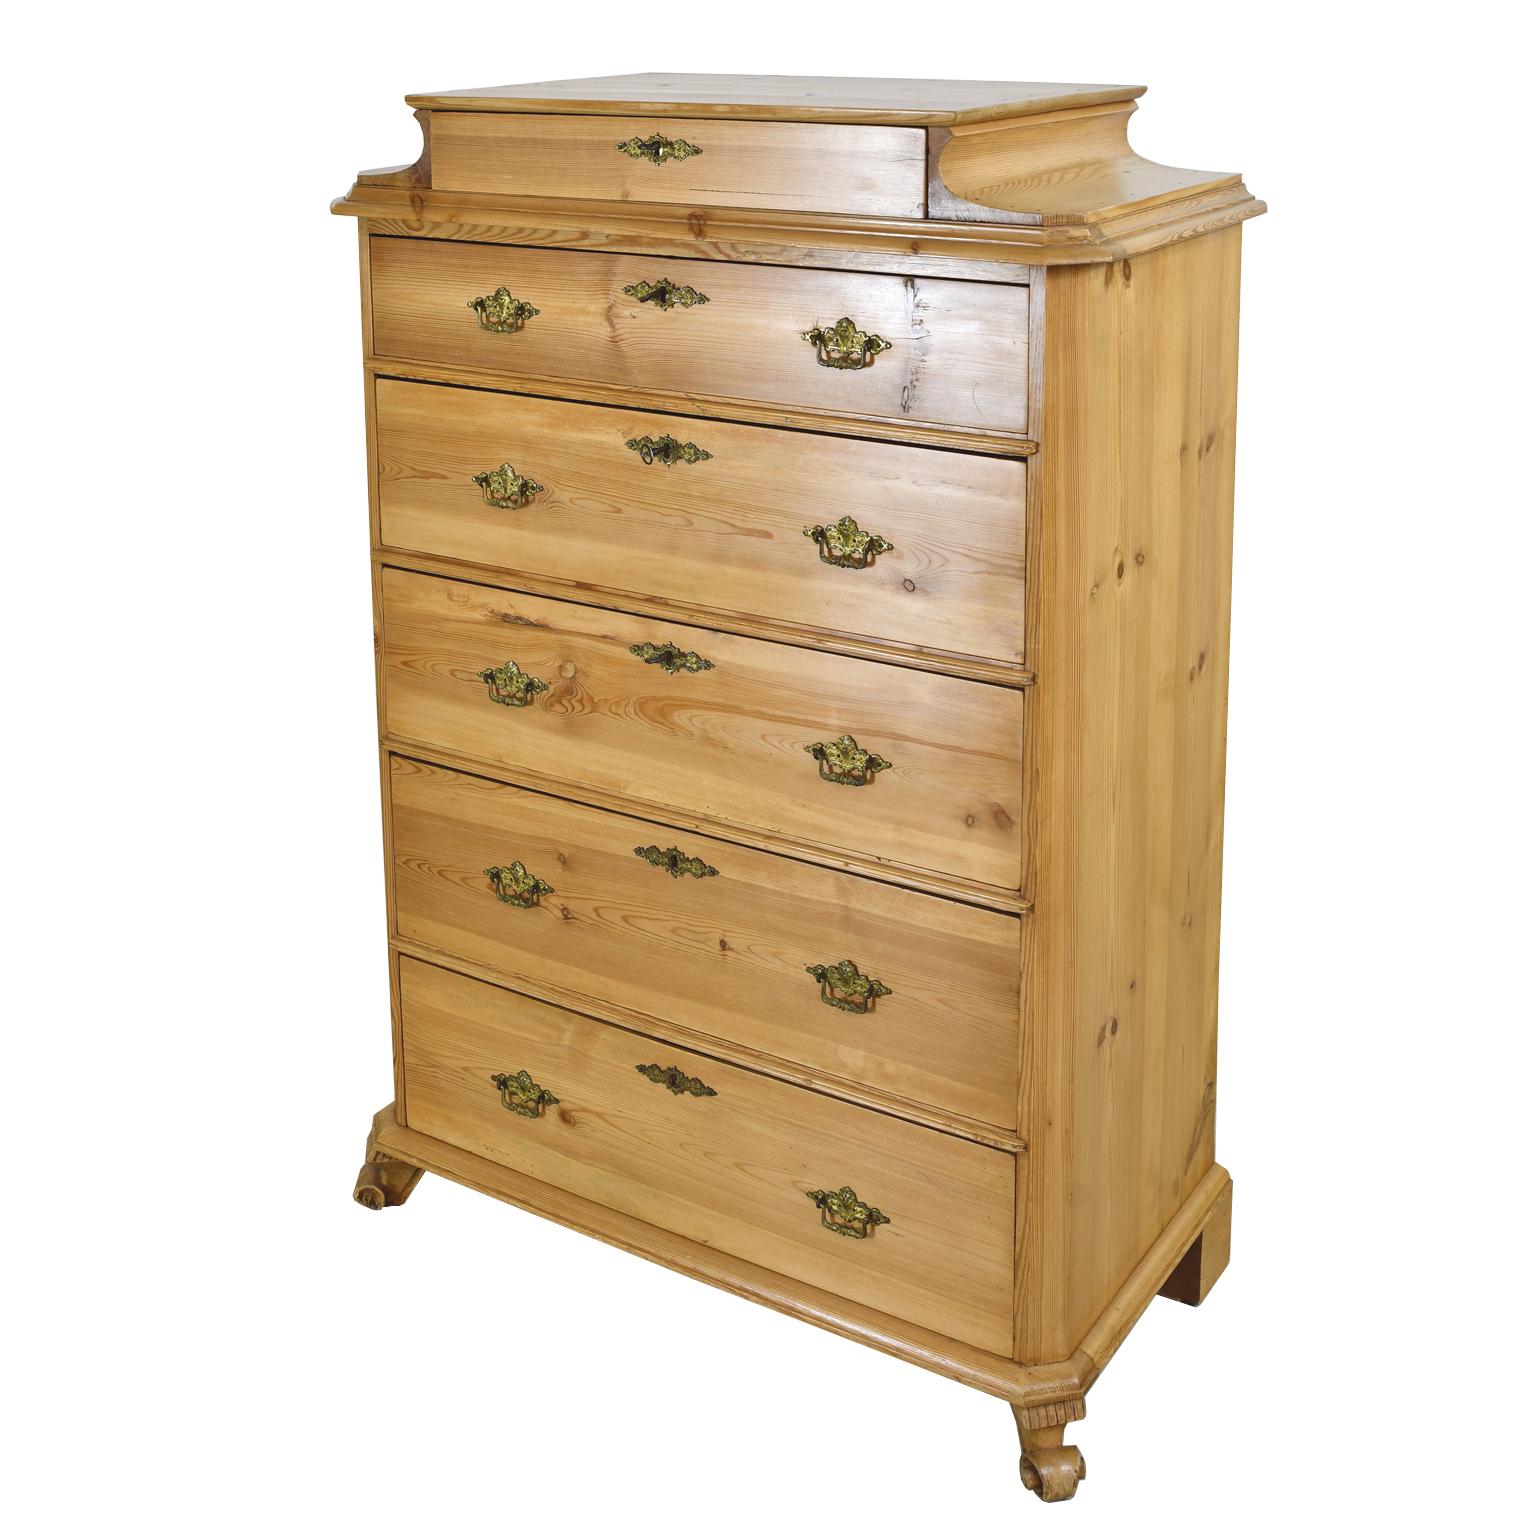 A charming chest in pine that is beautifully designed and handcrafted with pedestal top offering one drawer followed by five larger drawers, all with original brass key plates and bales. Chest has chamfered corners and rests on carved scroll feet.